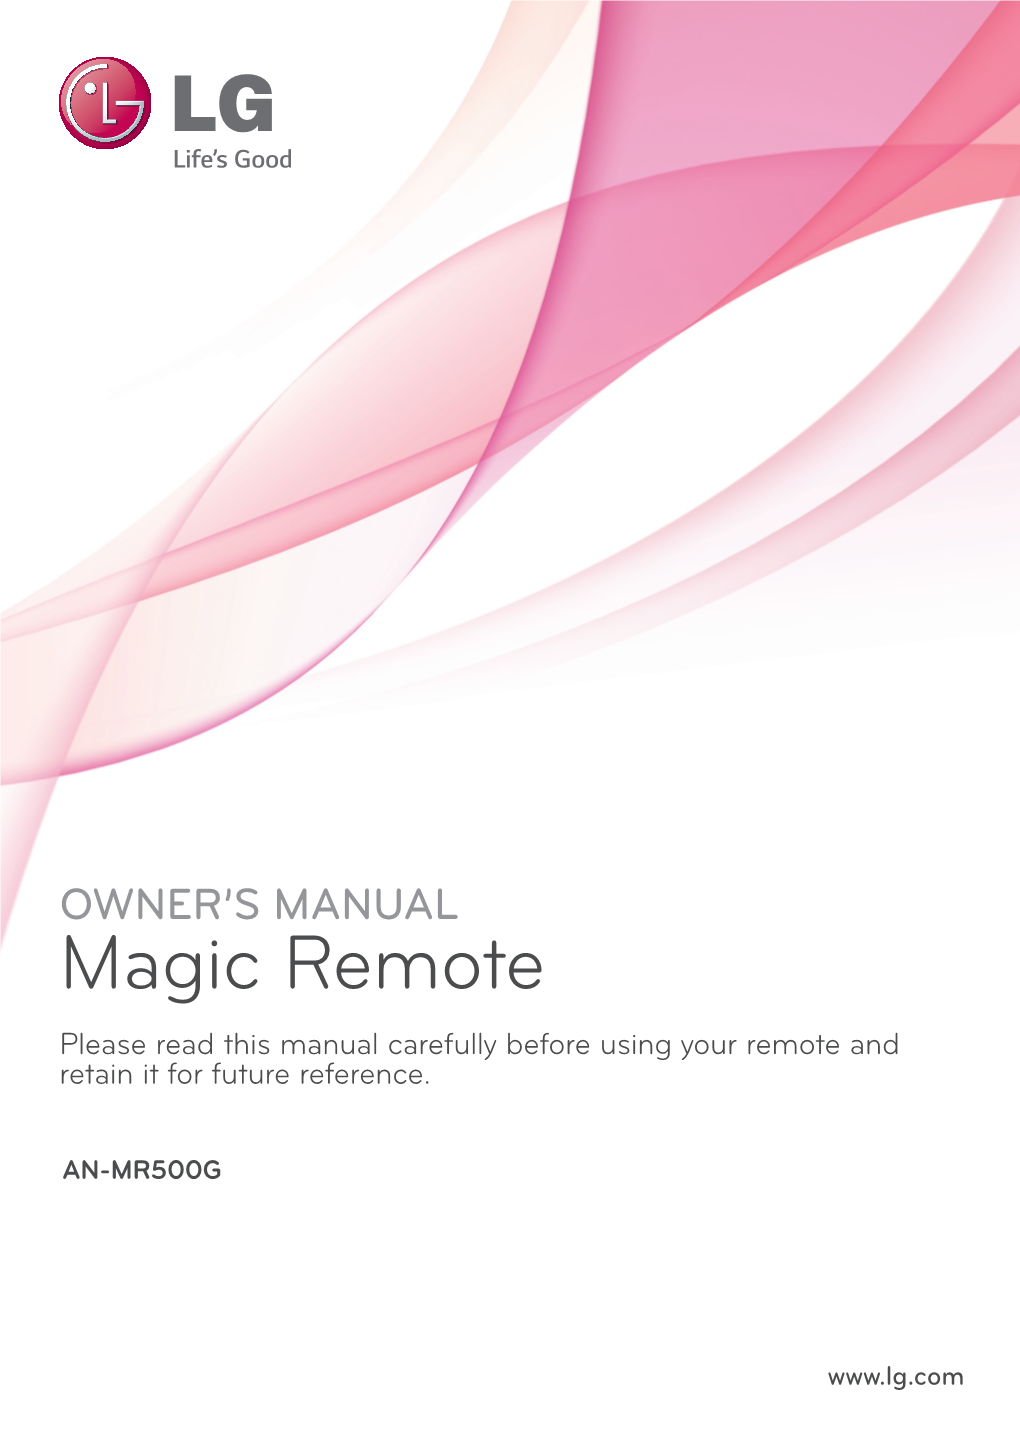 Magic Remote Please Read This Manual Carefully Before Using Your Remote and Retain It for Future Reference